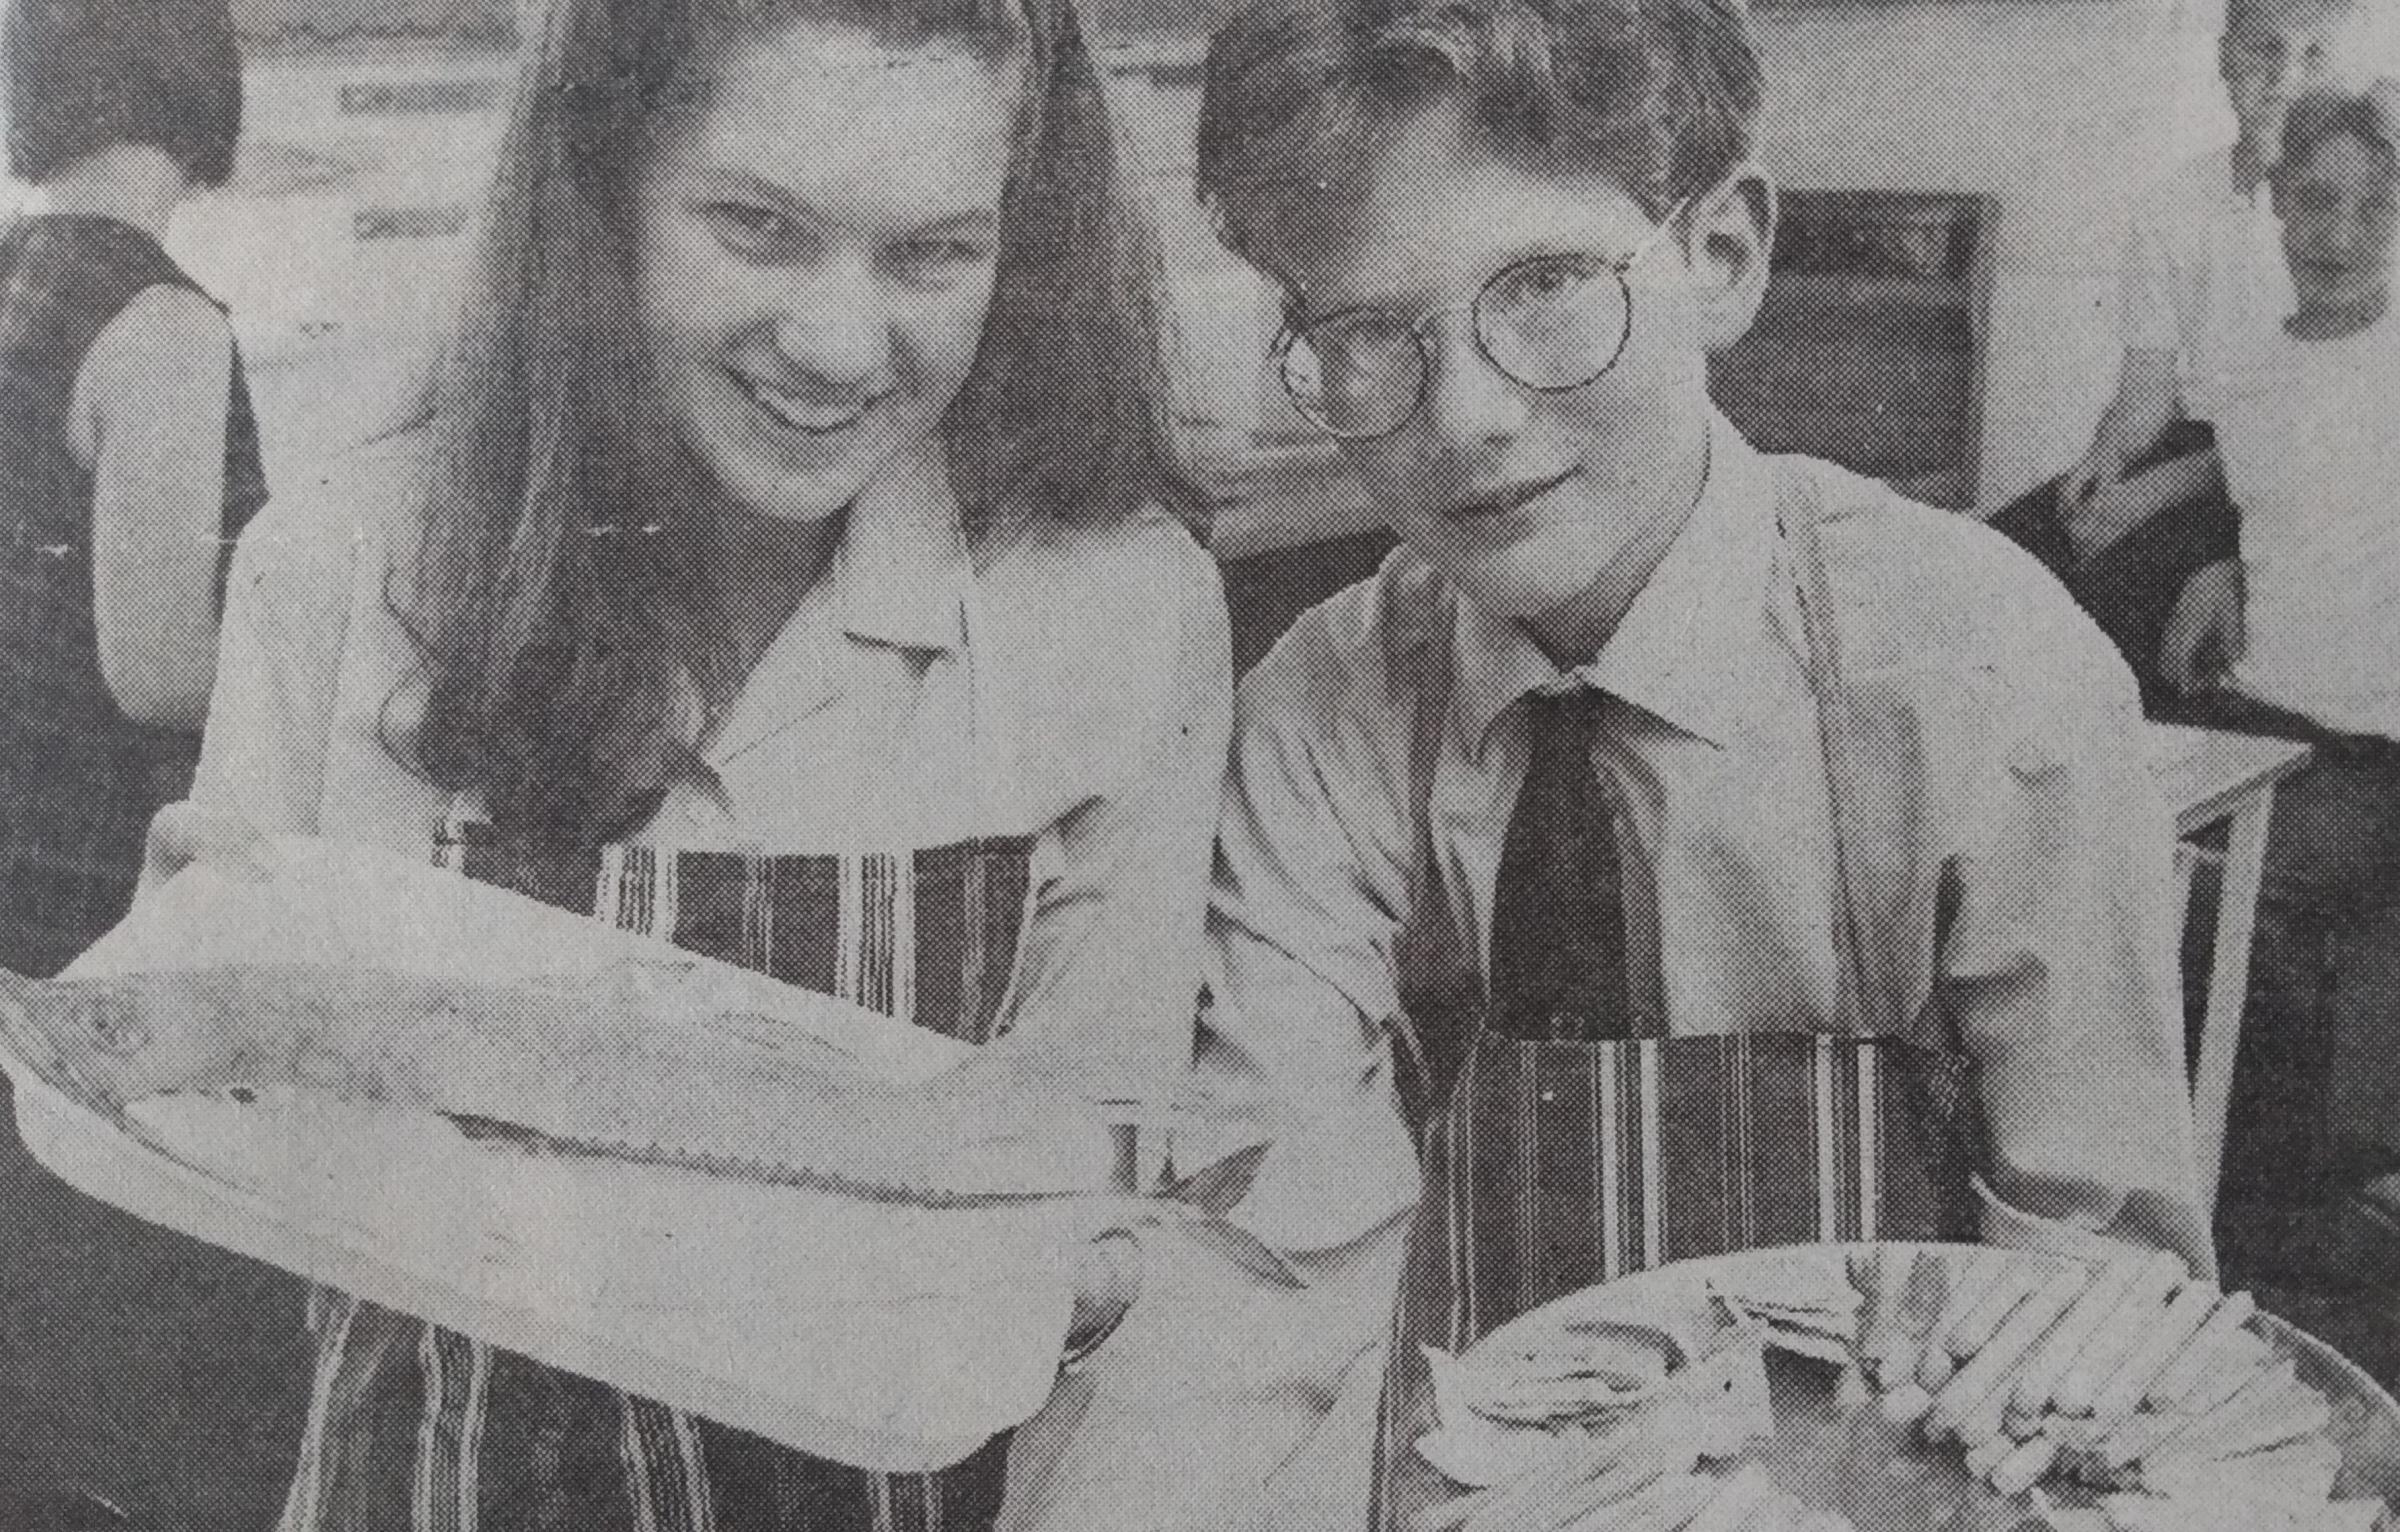 July 1995 and Gillian Ashe and Stuart Robinson were busy preparing healthy snacks for fellow pupils. The school was one of only 12 in the country to be selected for a pioneering European health study